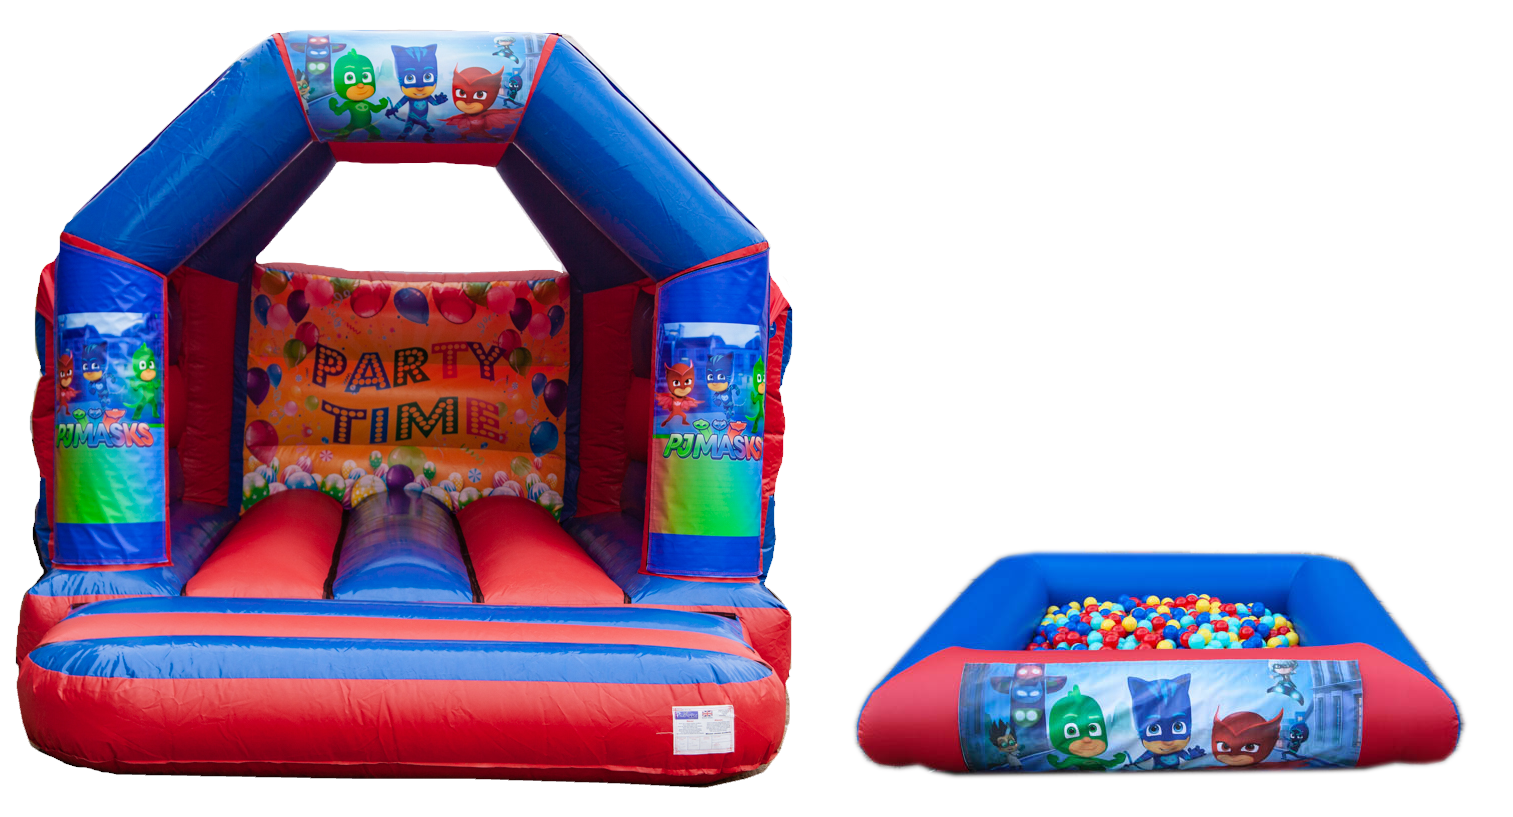 Red & Blue Bouncy castle and ballpool package for hire in Arlesey